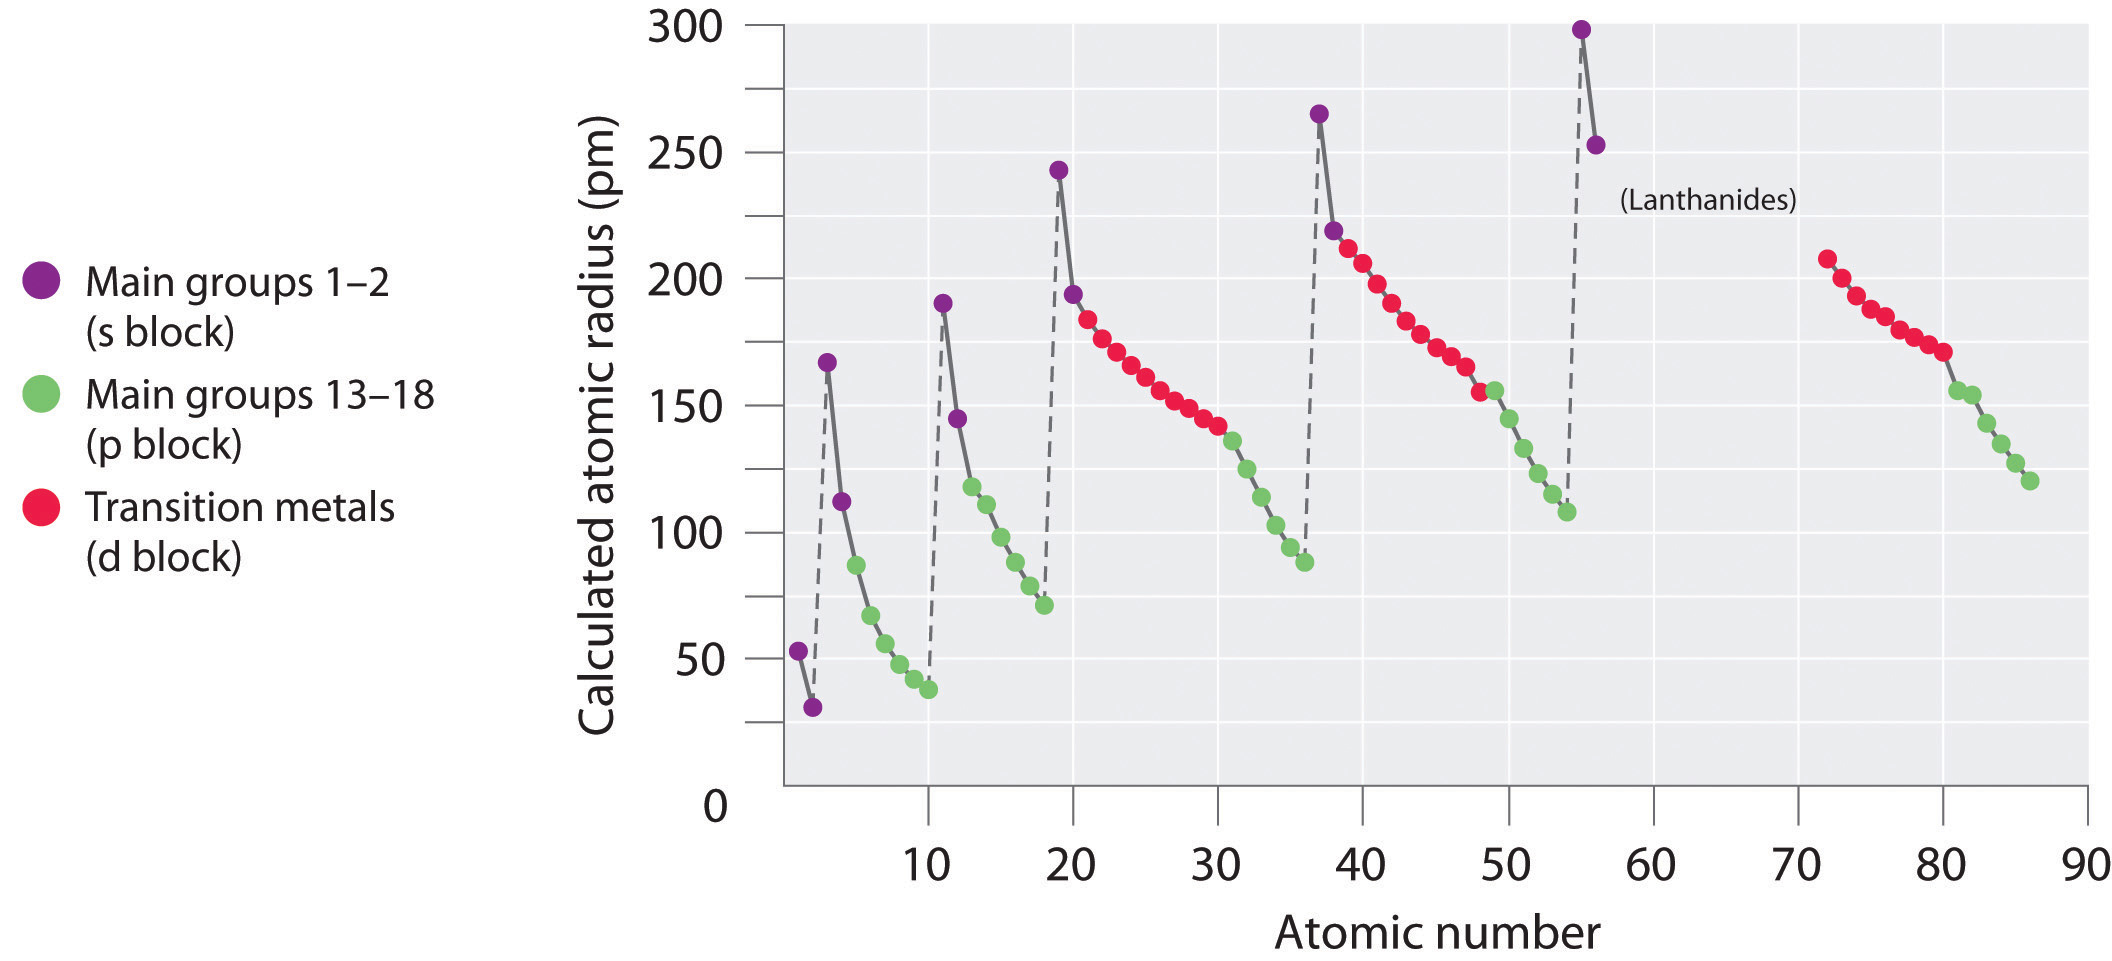 Graph of atomic number versus the calculated atomic radius in picometers for the s block, p block, and d block.